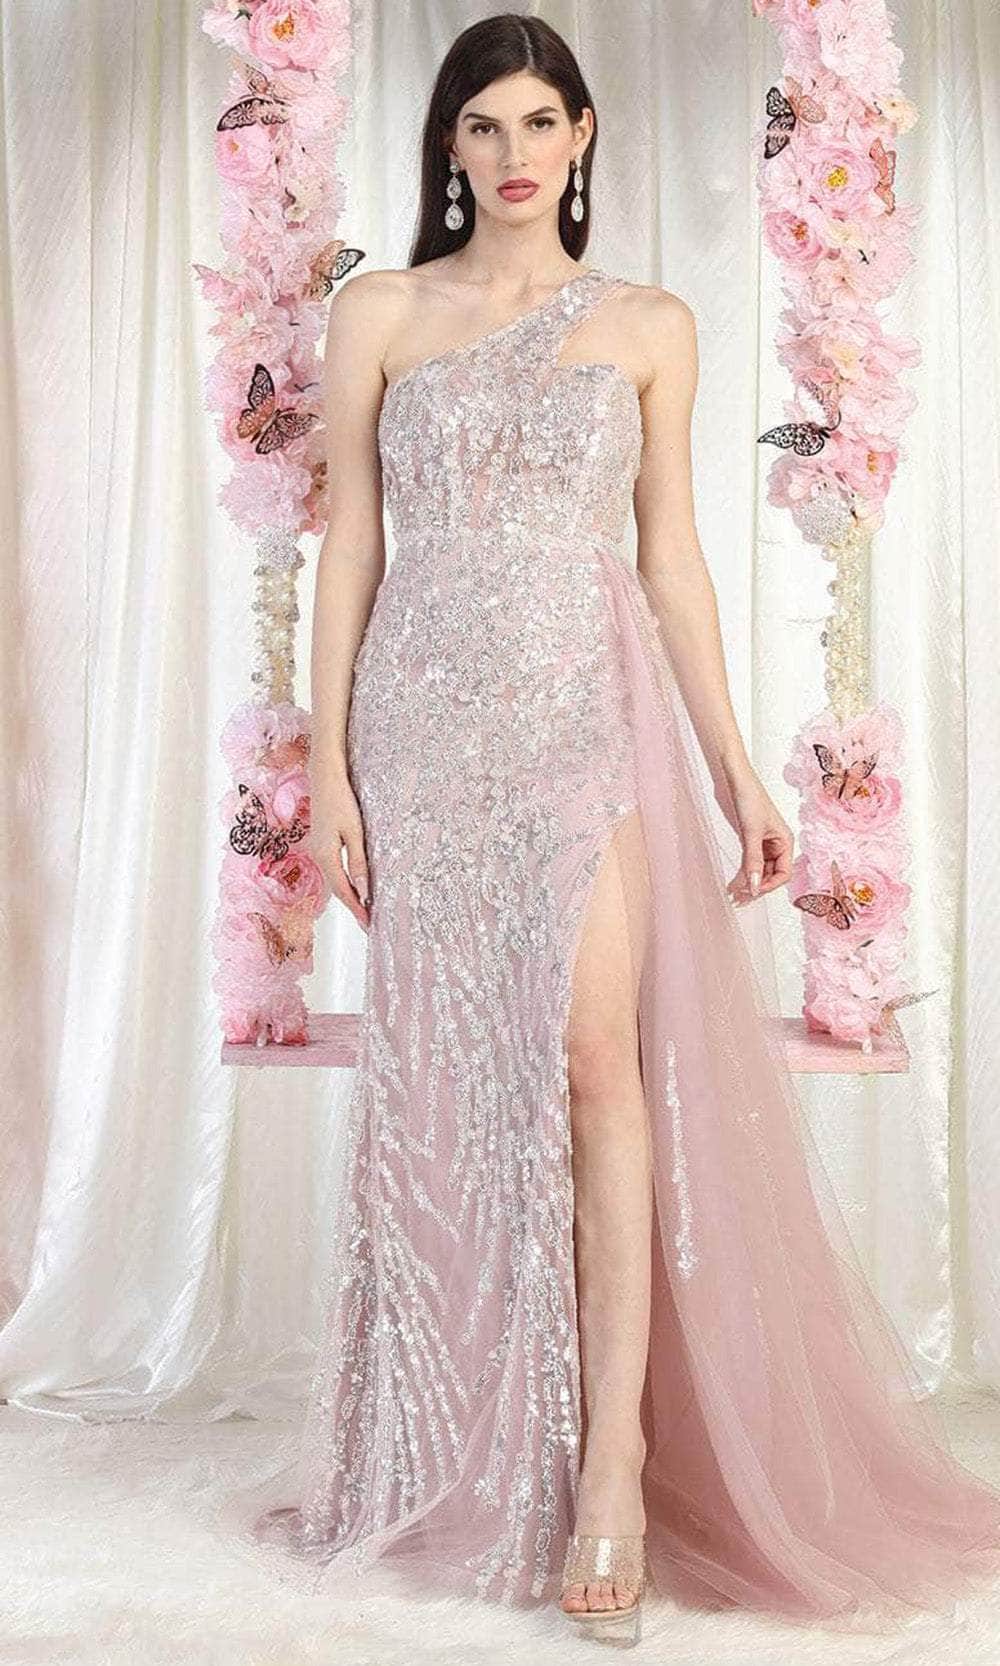 May Queen RQ8026 - Embroidered One Shoulder Evening Gown
